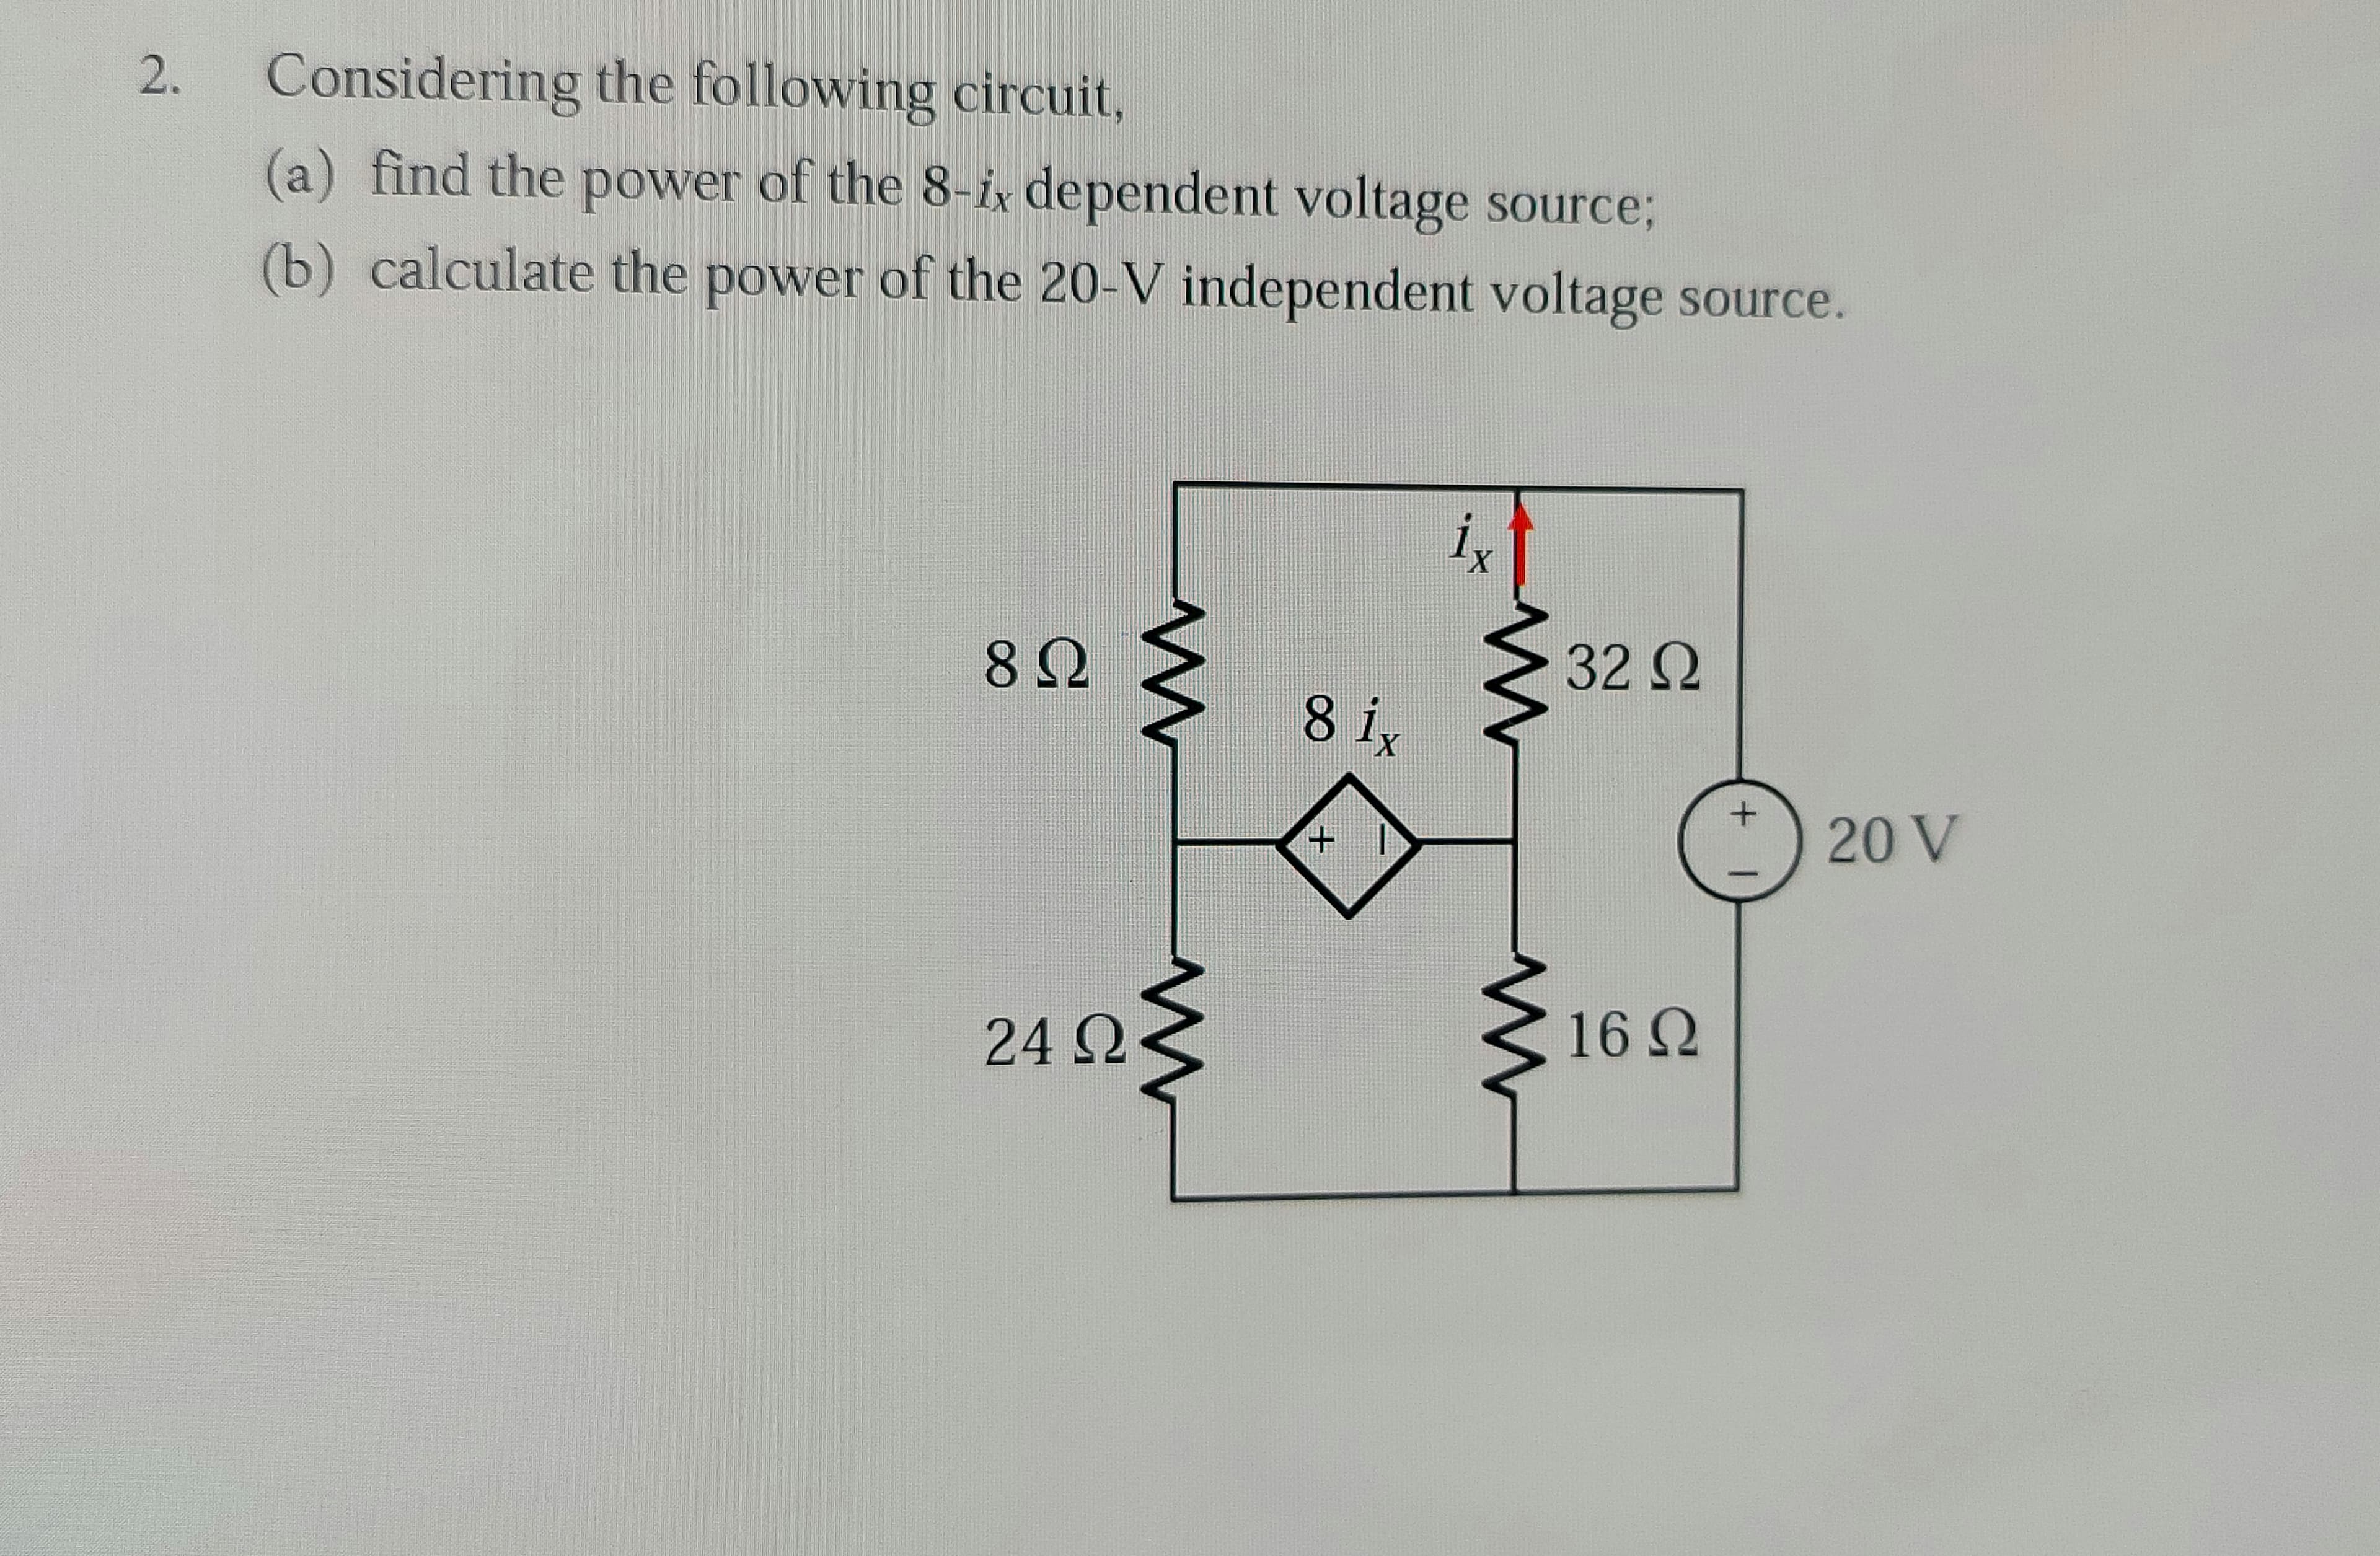 2.
Considering the following circuit,
(a) find the power of the 8-ix dependent voltage source3;
(b) calculate the power of the 20-V independent voltage source.
i,
82
32Q
8 ix
20 V
242
16Q
